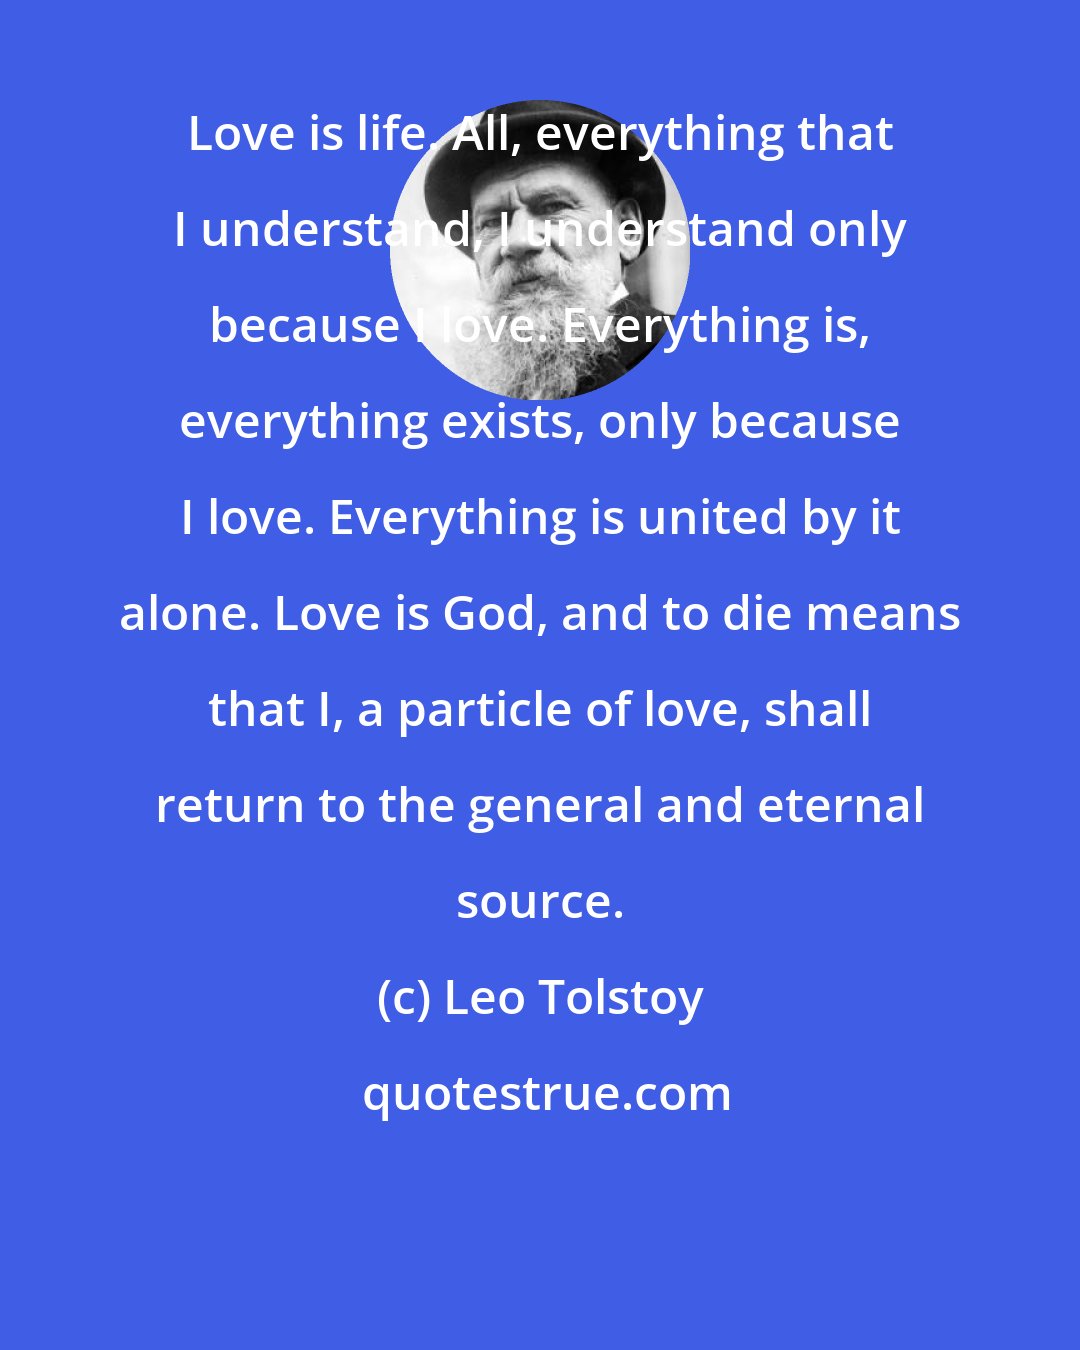 Leo Tolstoy: Love is life. All, everything that I understand, I understand only because I love. Everything is, everything exists, only because I love. Everything is united by it alone. Love is God, and to die means that I, a particle of love, shall return to the general and eternal source.